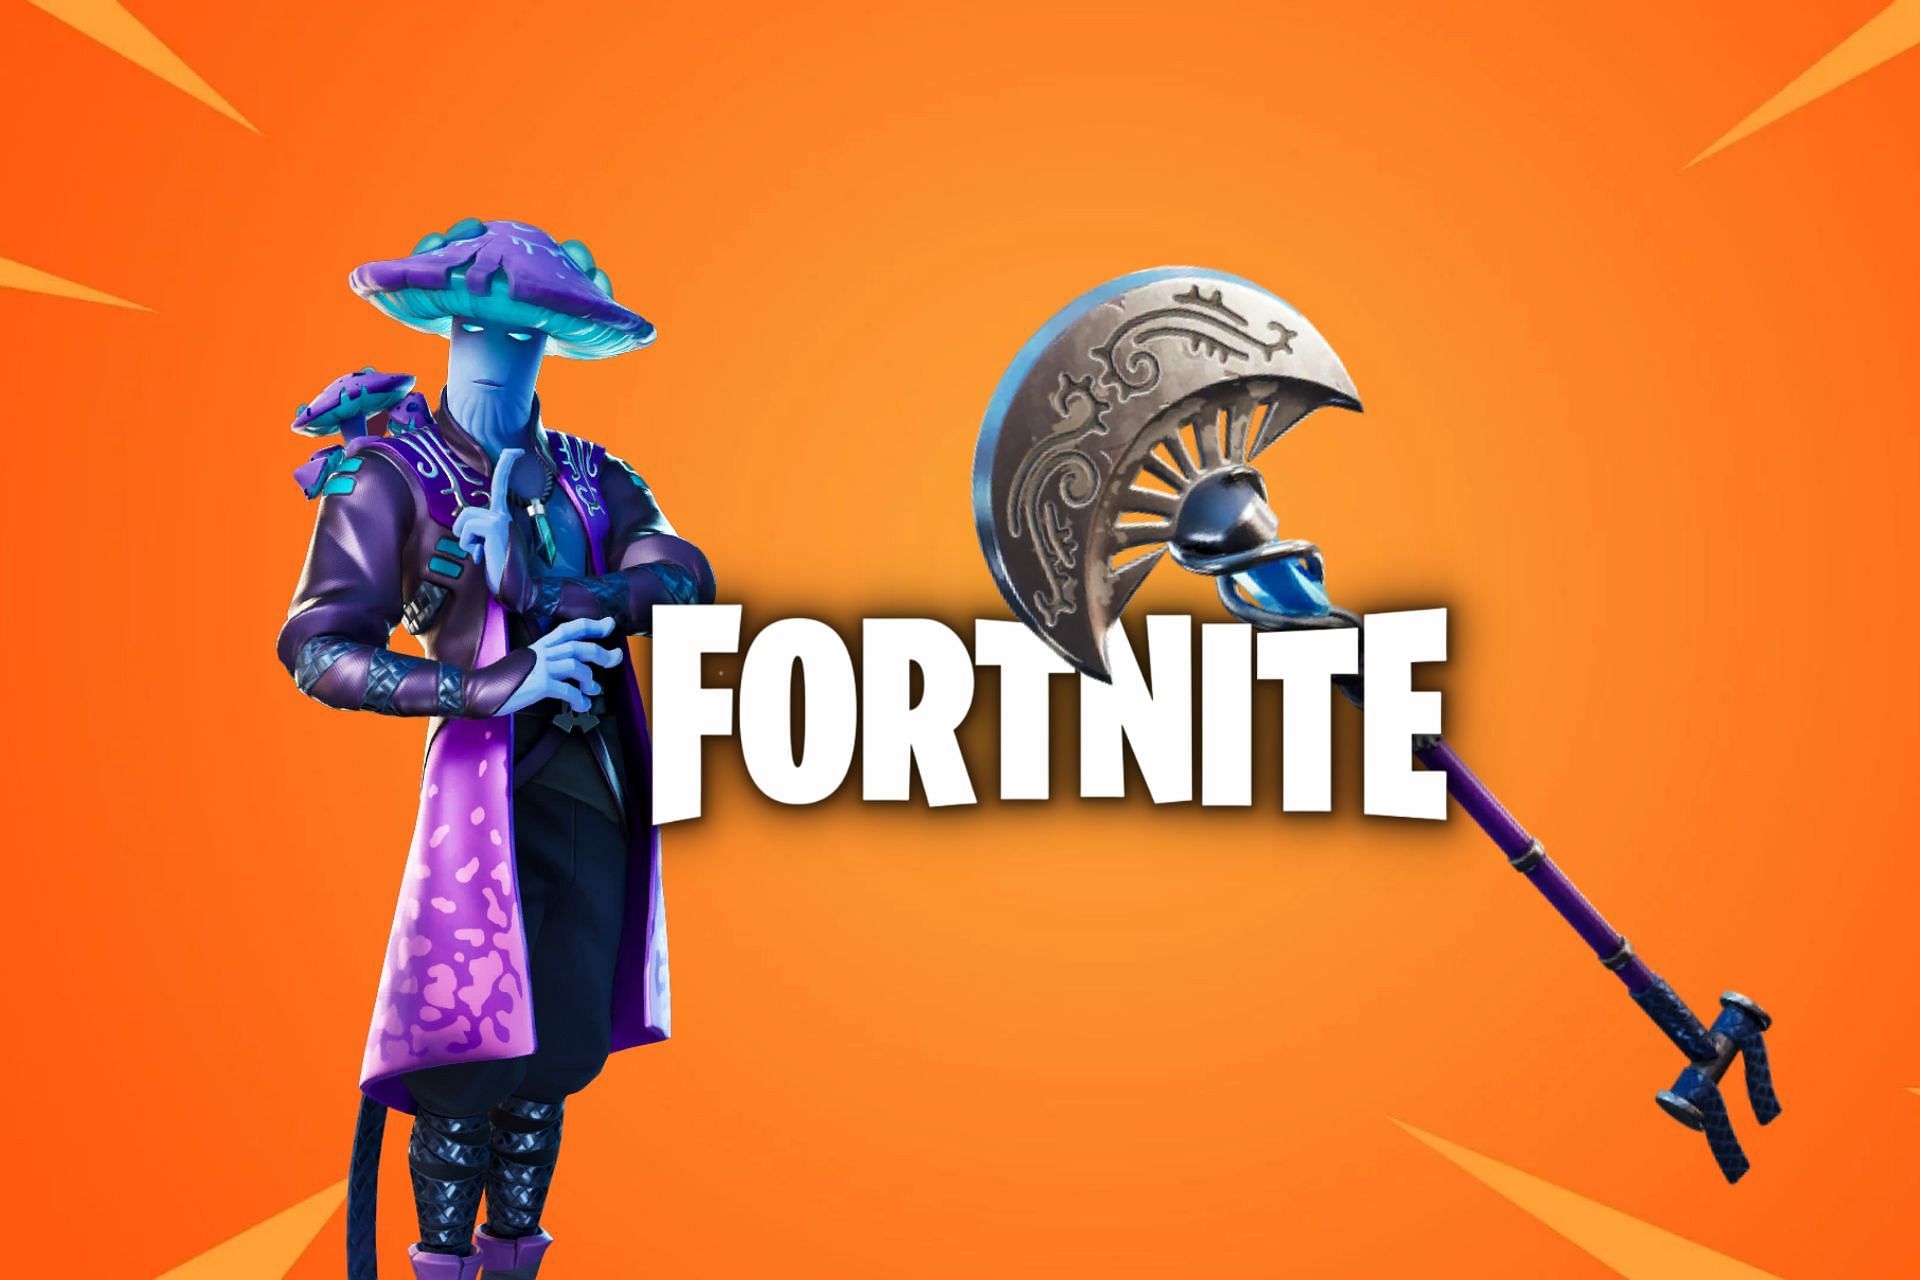 Fortnite is giving this pickaxe to players for free (Image via Epic Games)